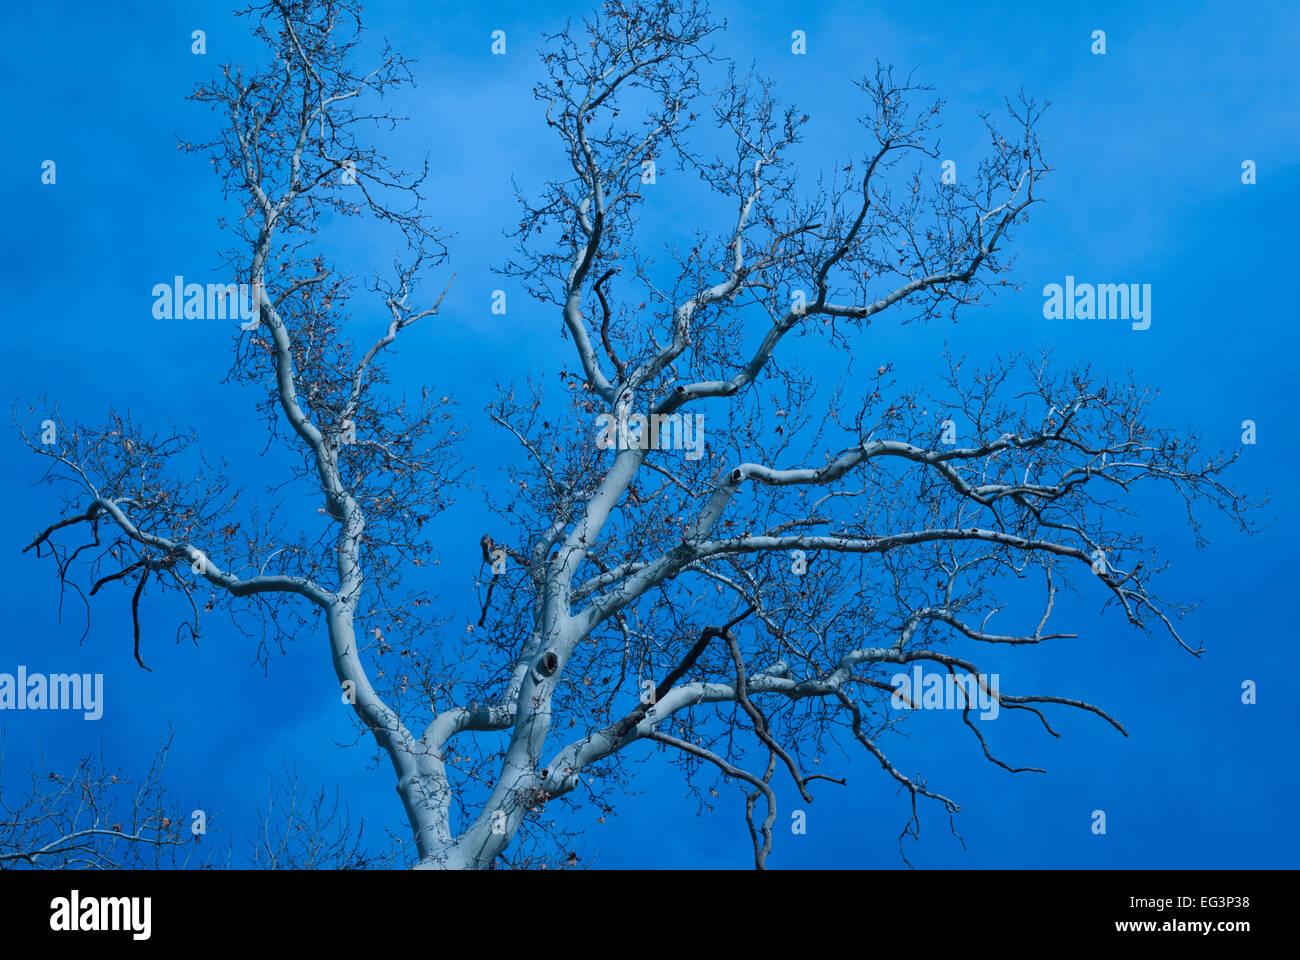 A beautiful tree against blue sky with interesting branches. Stock Photo